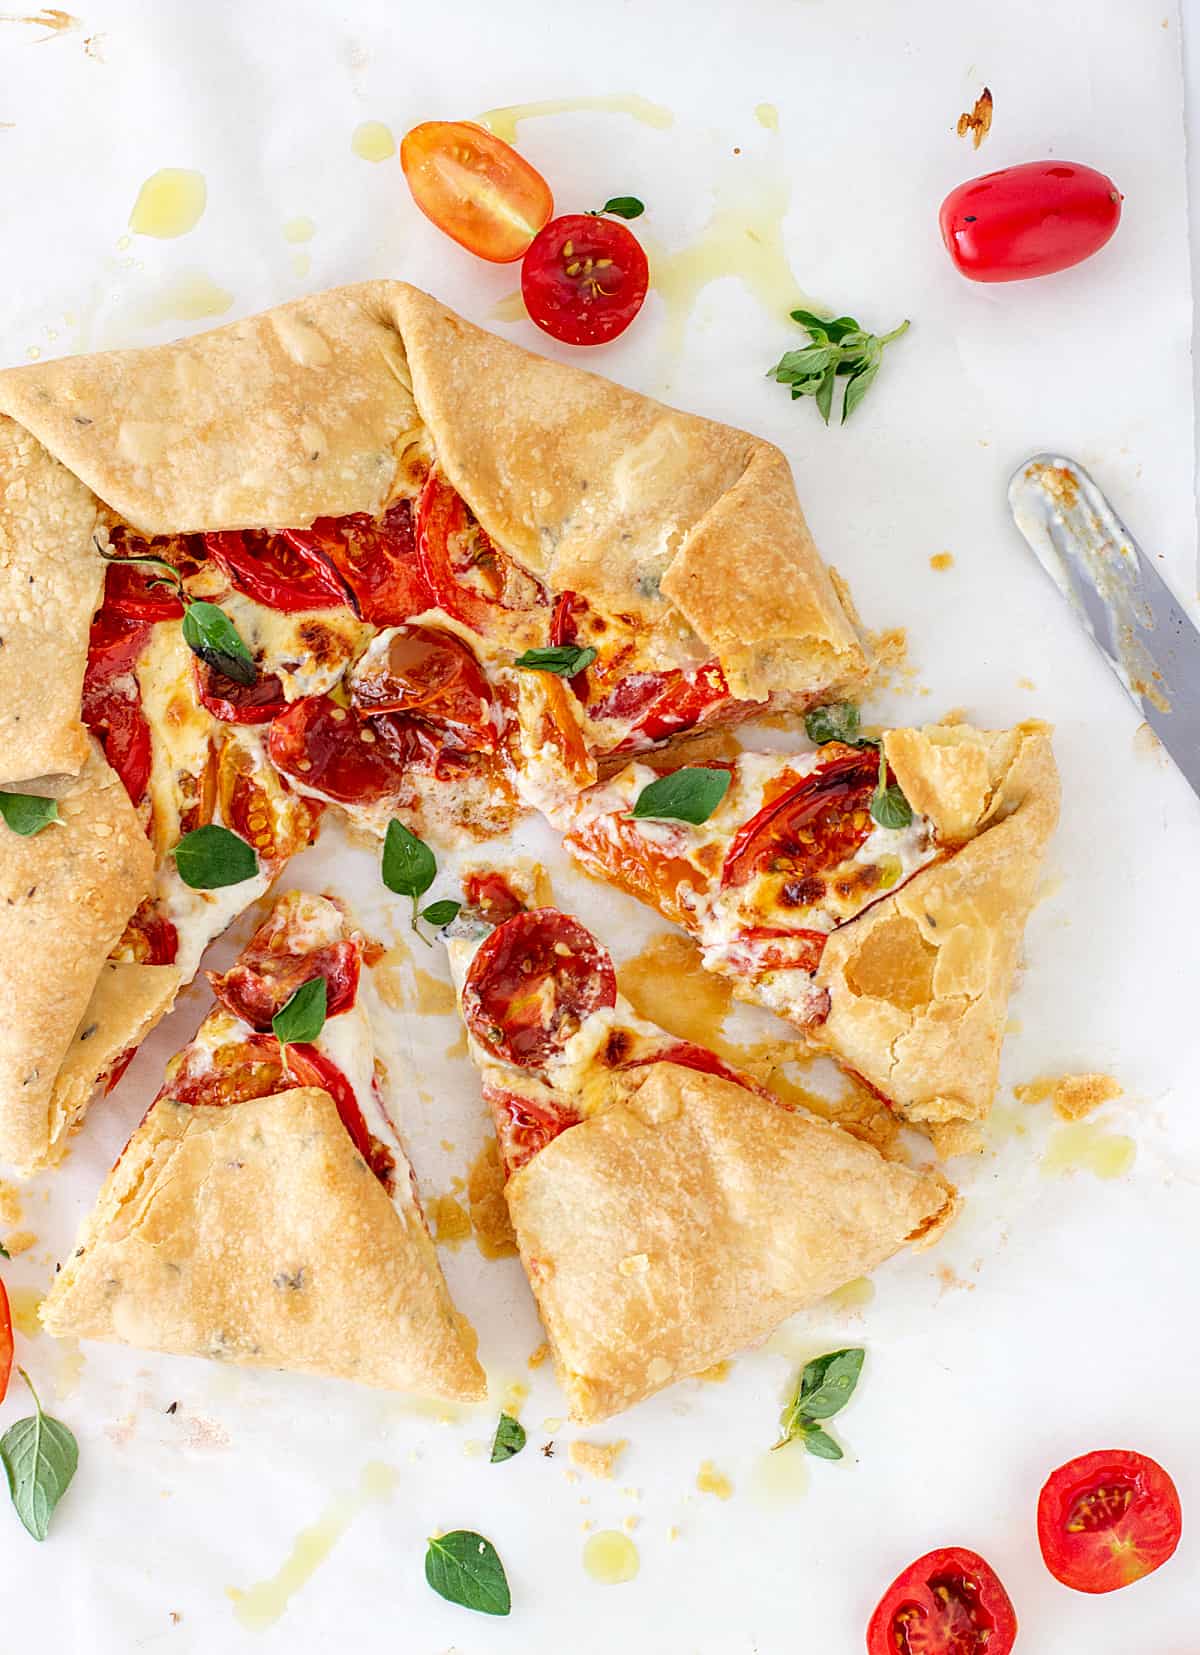 Overview of tomato galette with cut sliced on a white surface, loose herbs around.